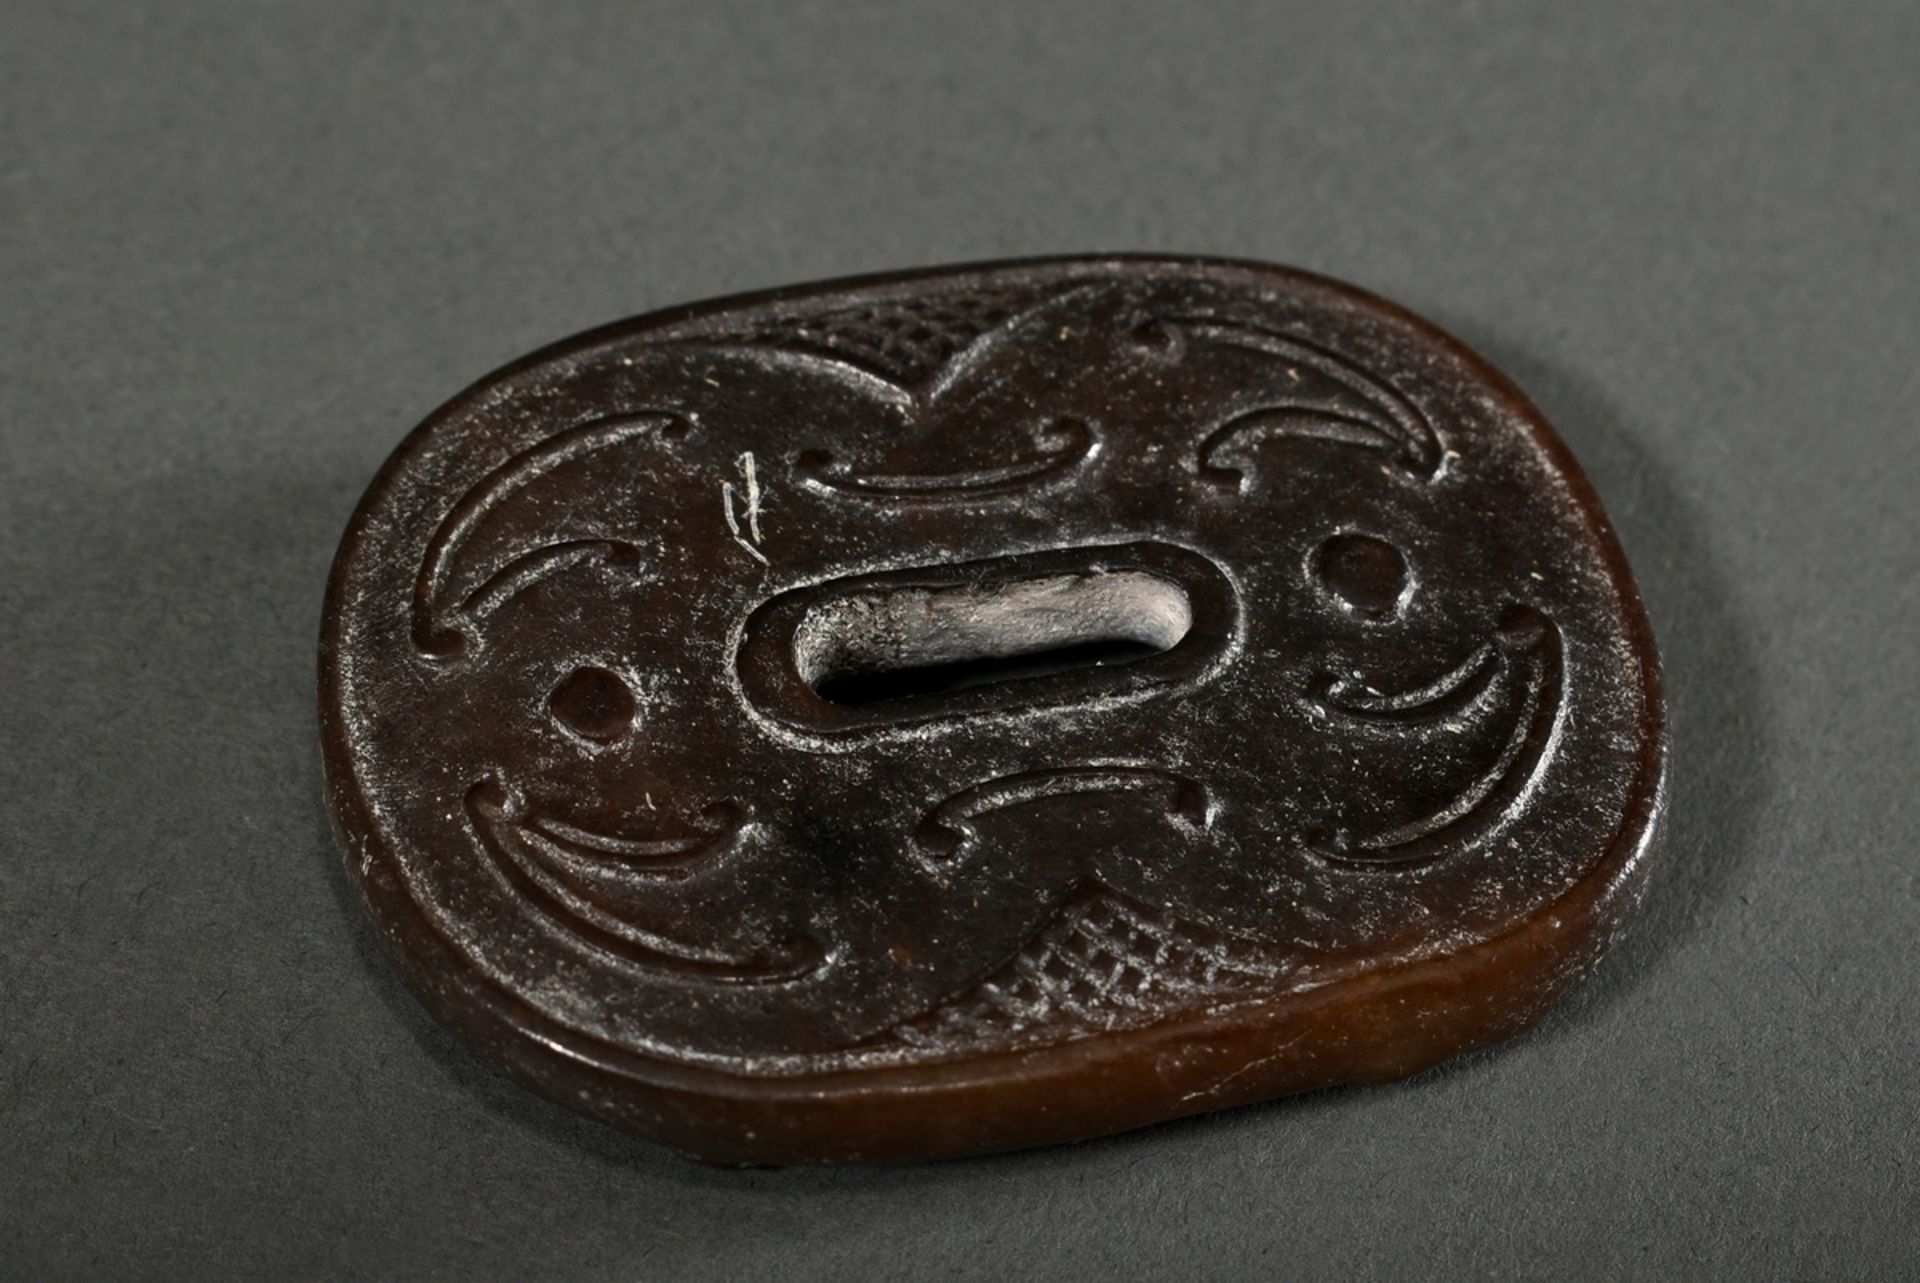 Oval dark brown jade in the shape of a Han period sword engraving with rain dragons and C ornaments - Image 2 of 3